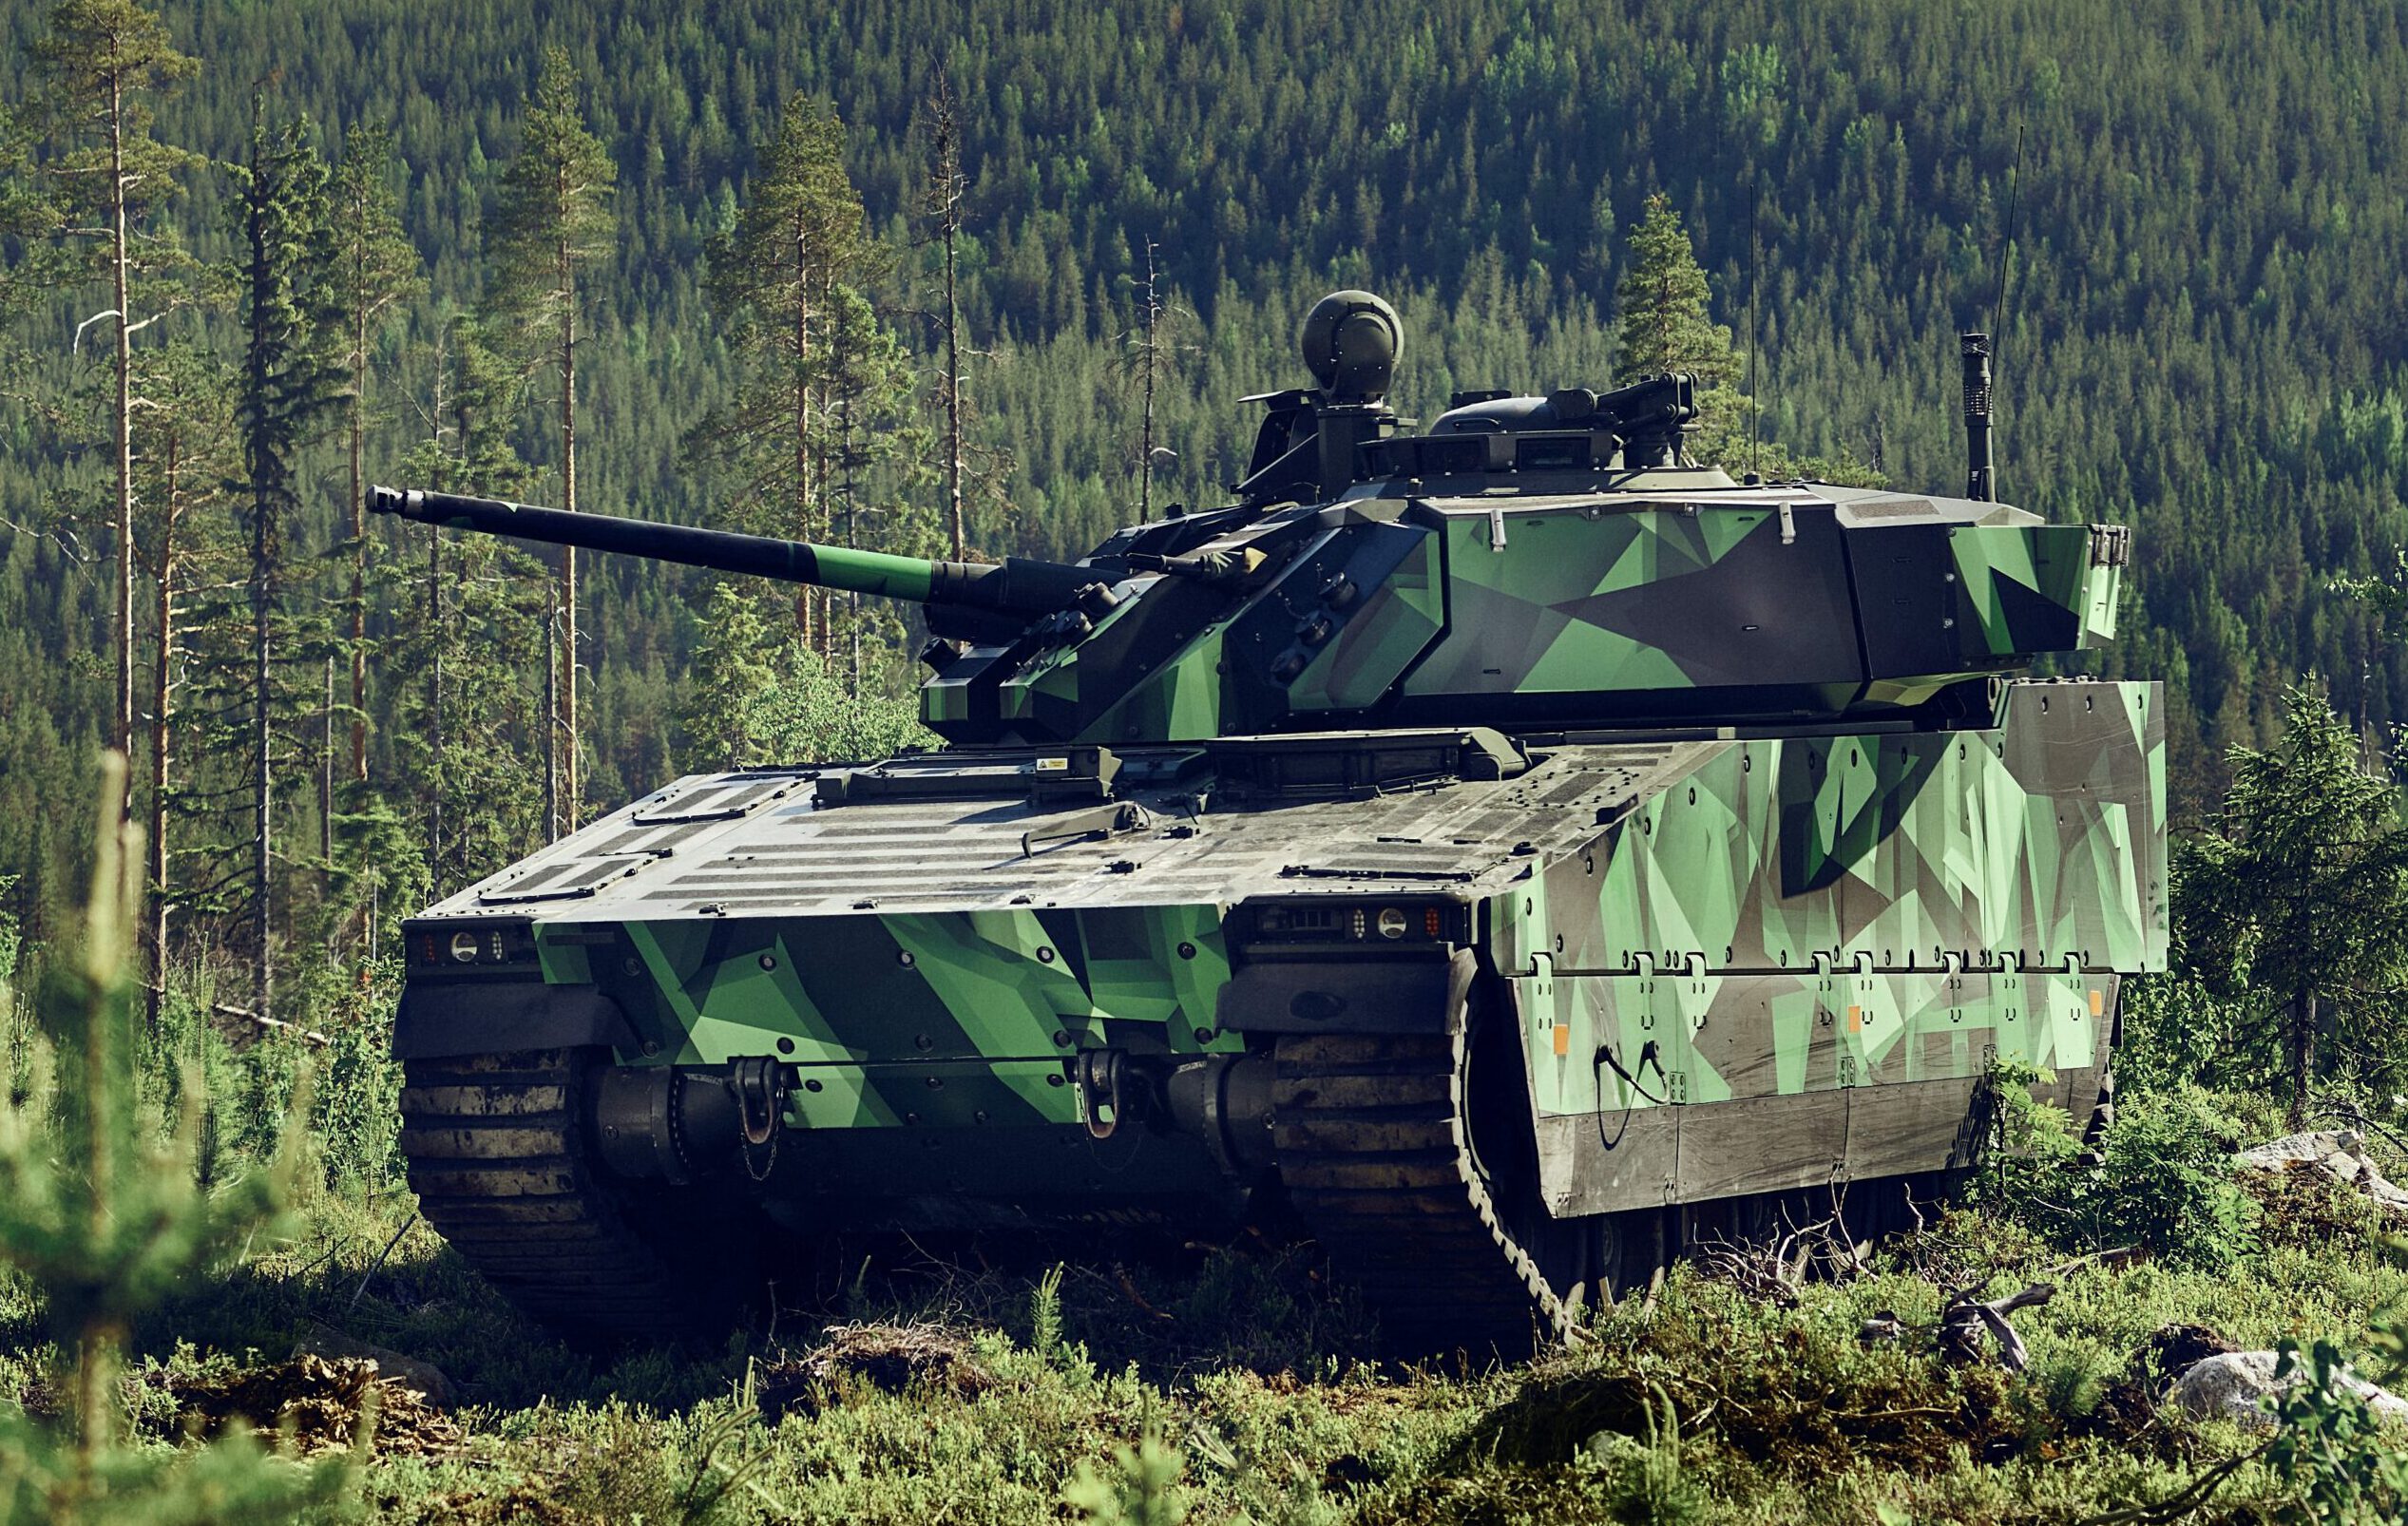 Not just F-35 fighters: Czech Republic buys 210 Swedish CV90 BMPs